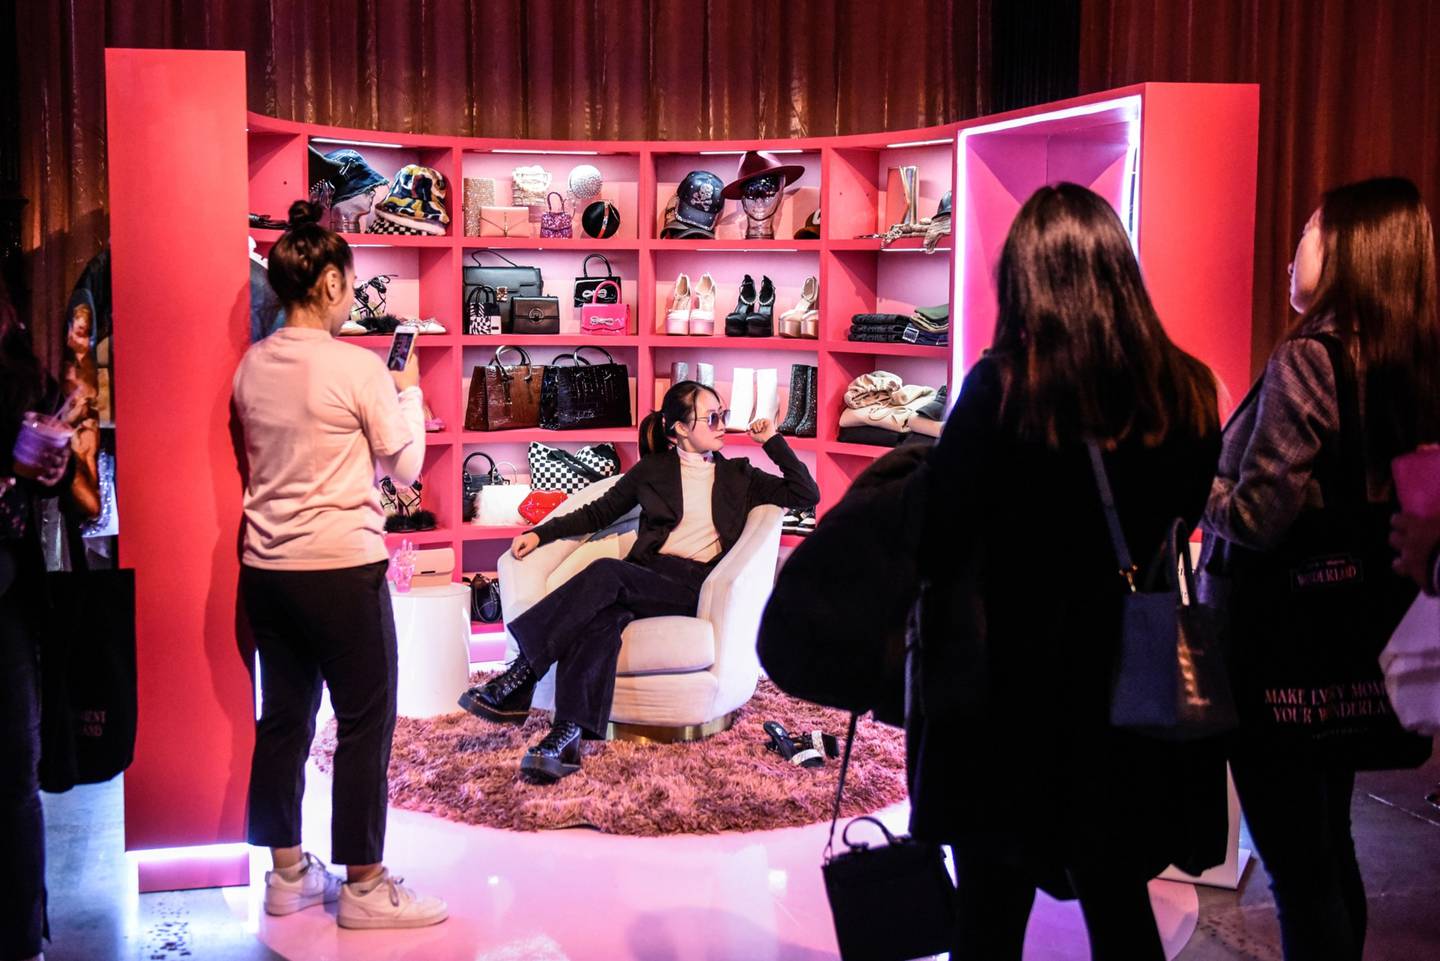 Shoppers take photos at the Shein pop-up store in New York.dfd